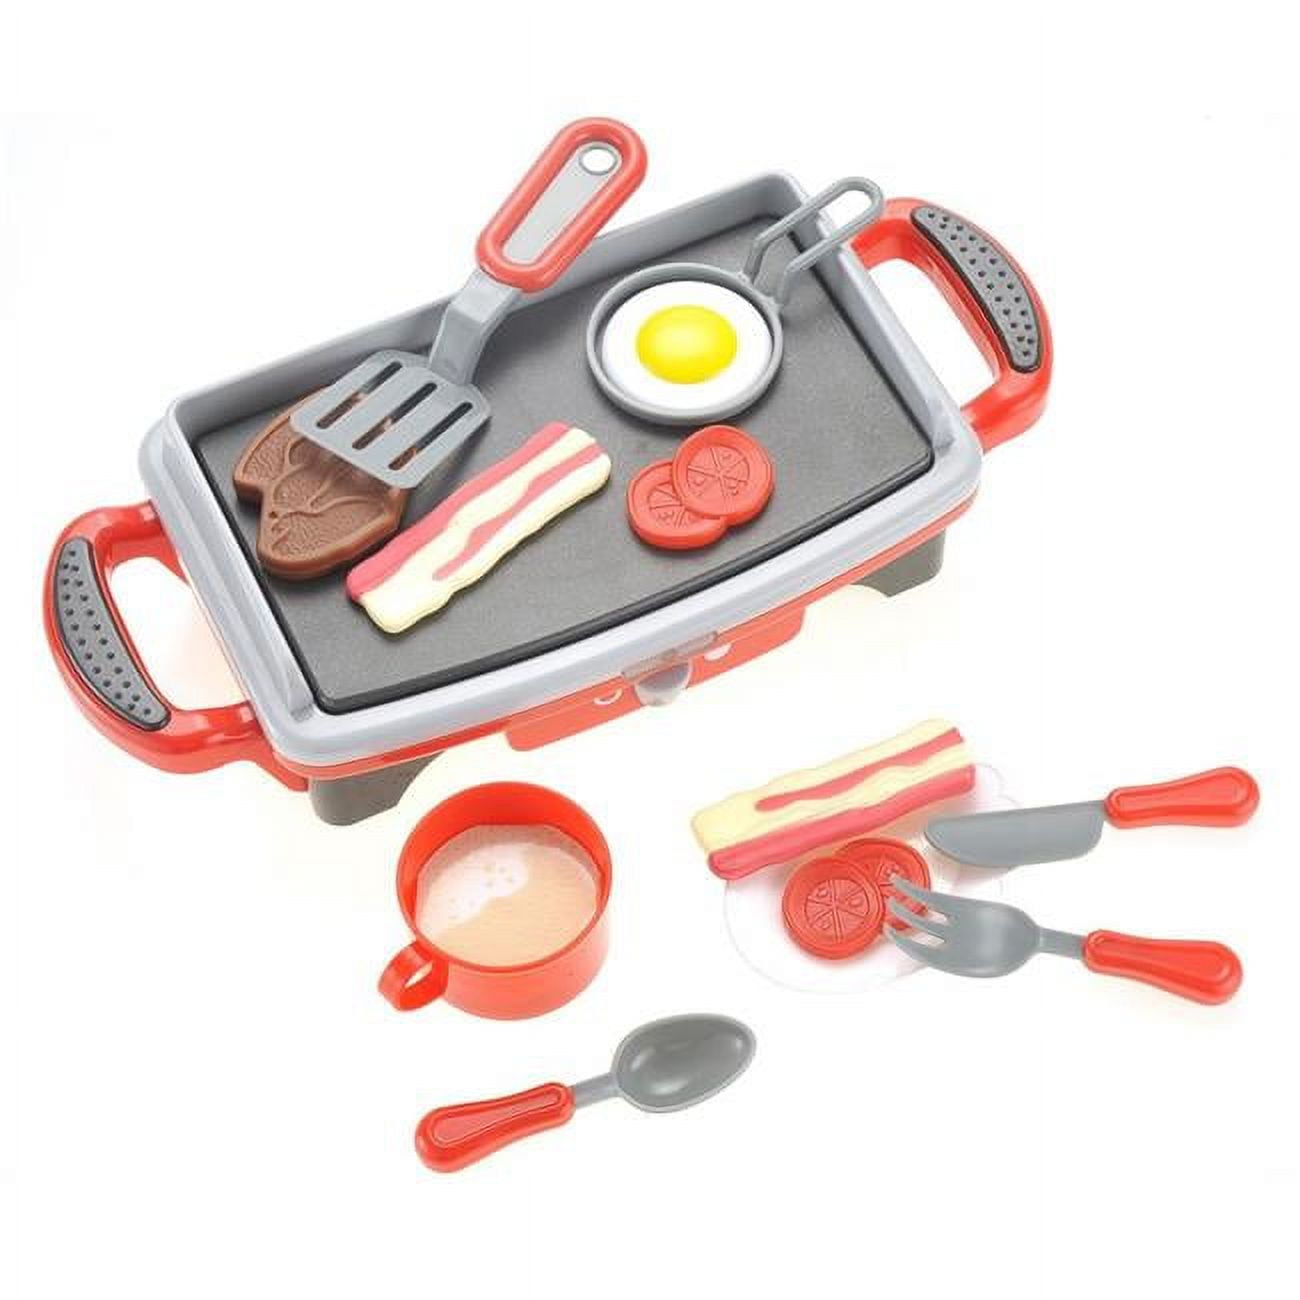 Breakfast Griddle Electric Stove Play Food Kitchen Grill Set For Kids